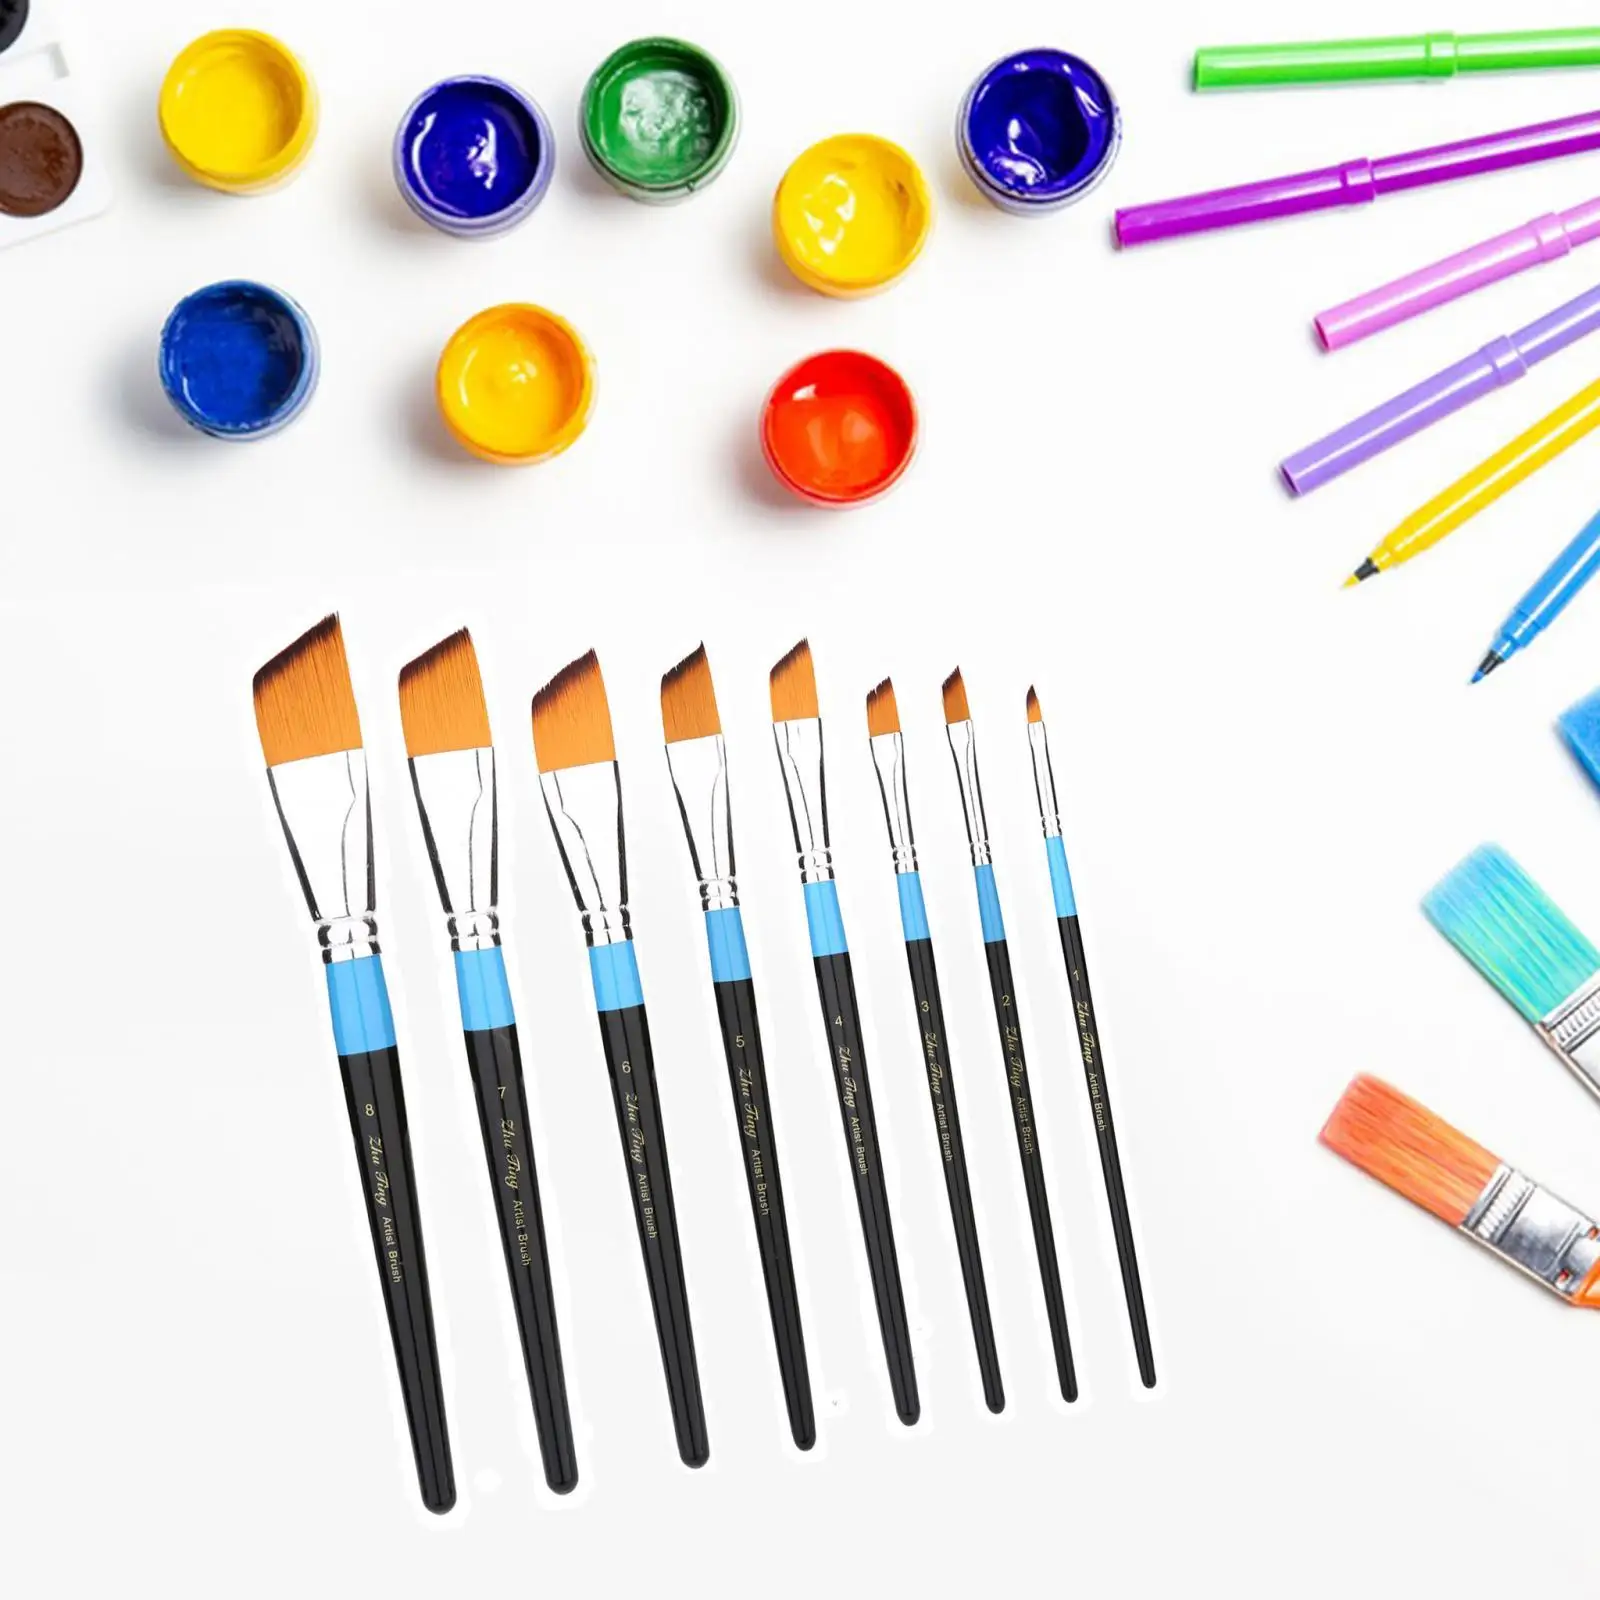 8 Pieces Paint Brush Set Professional for Beginner Pros Artist Brushes for Acrylic Gouache Watercolor Oil Arts Crafts Supplies